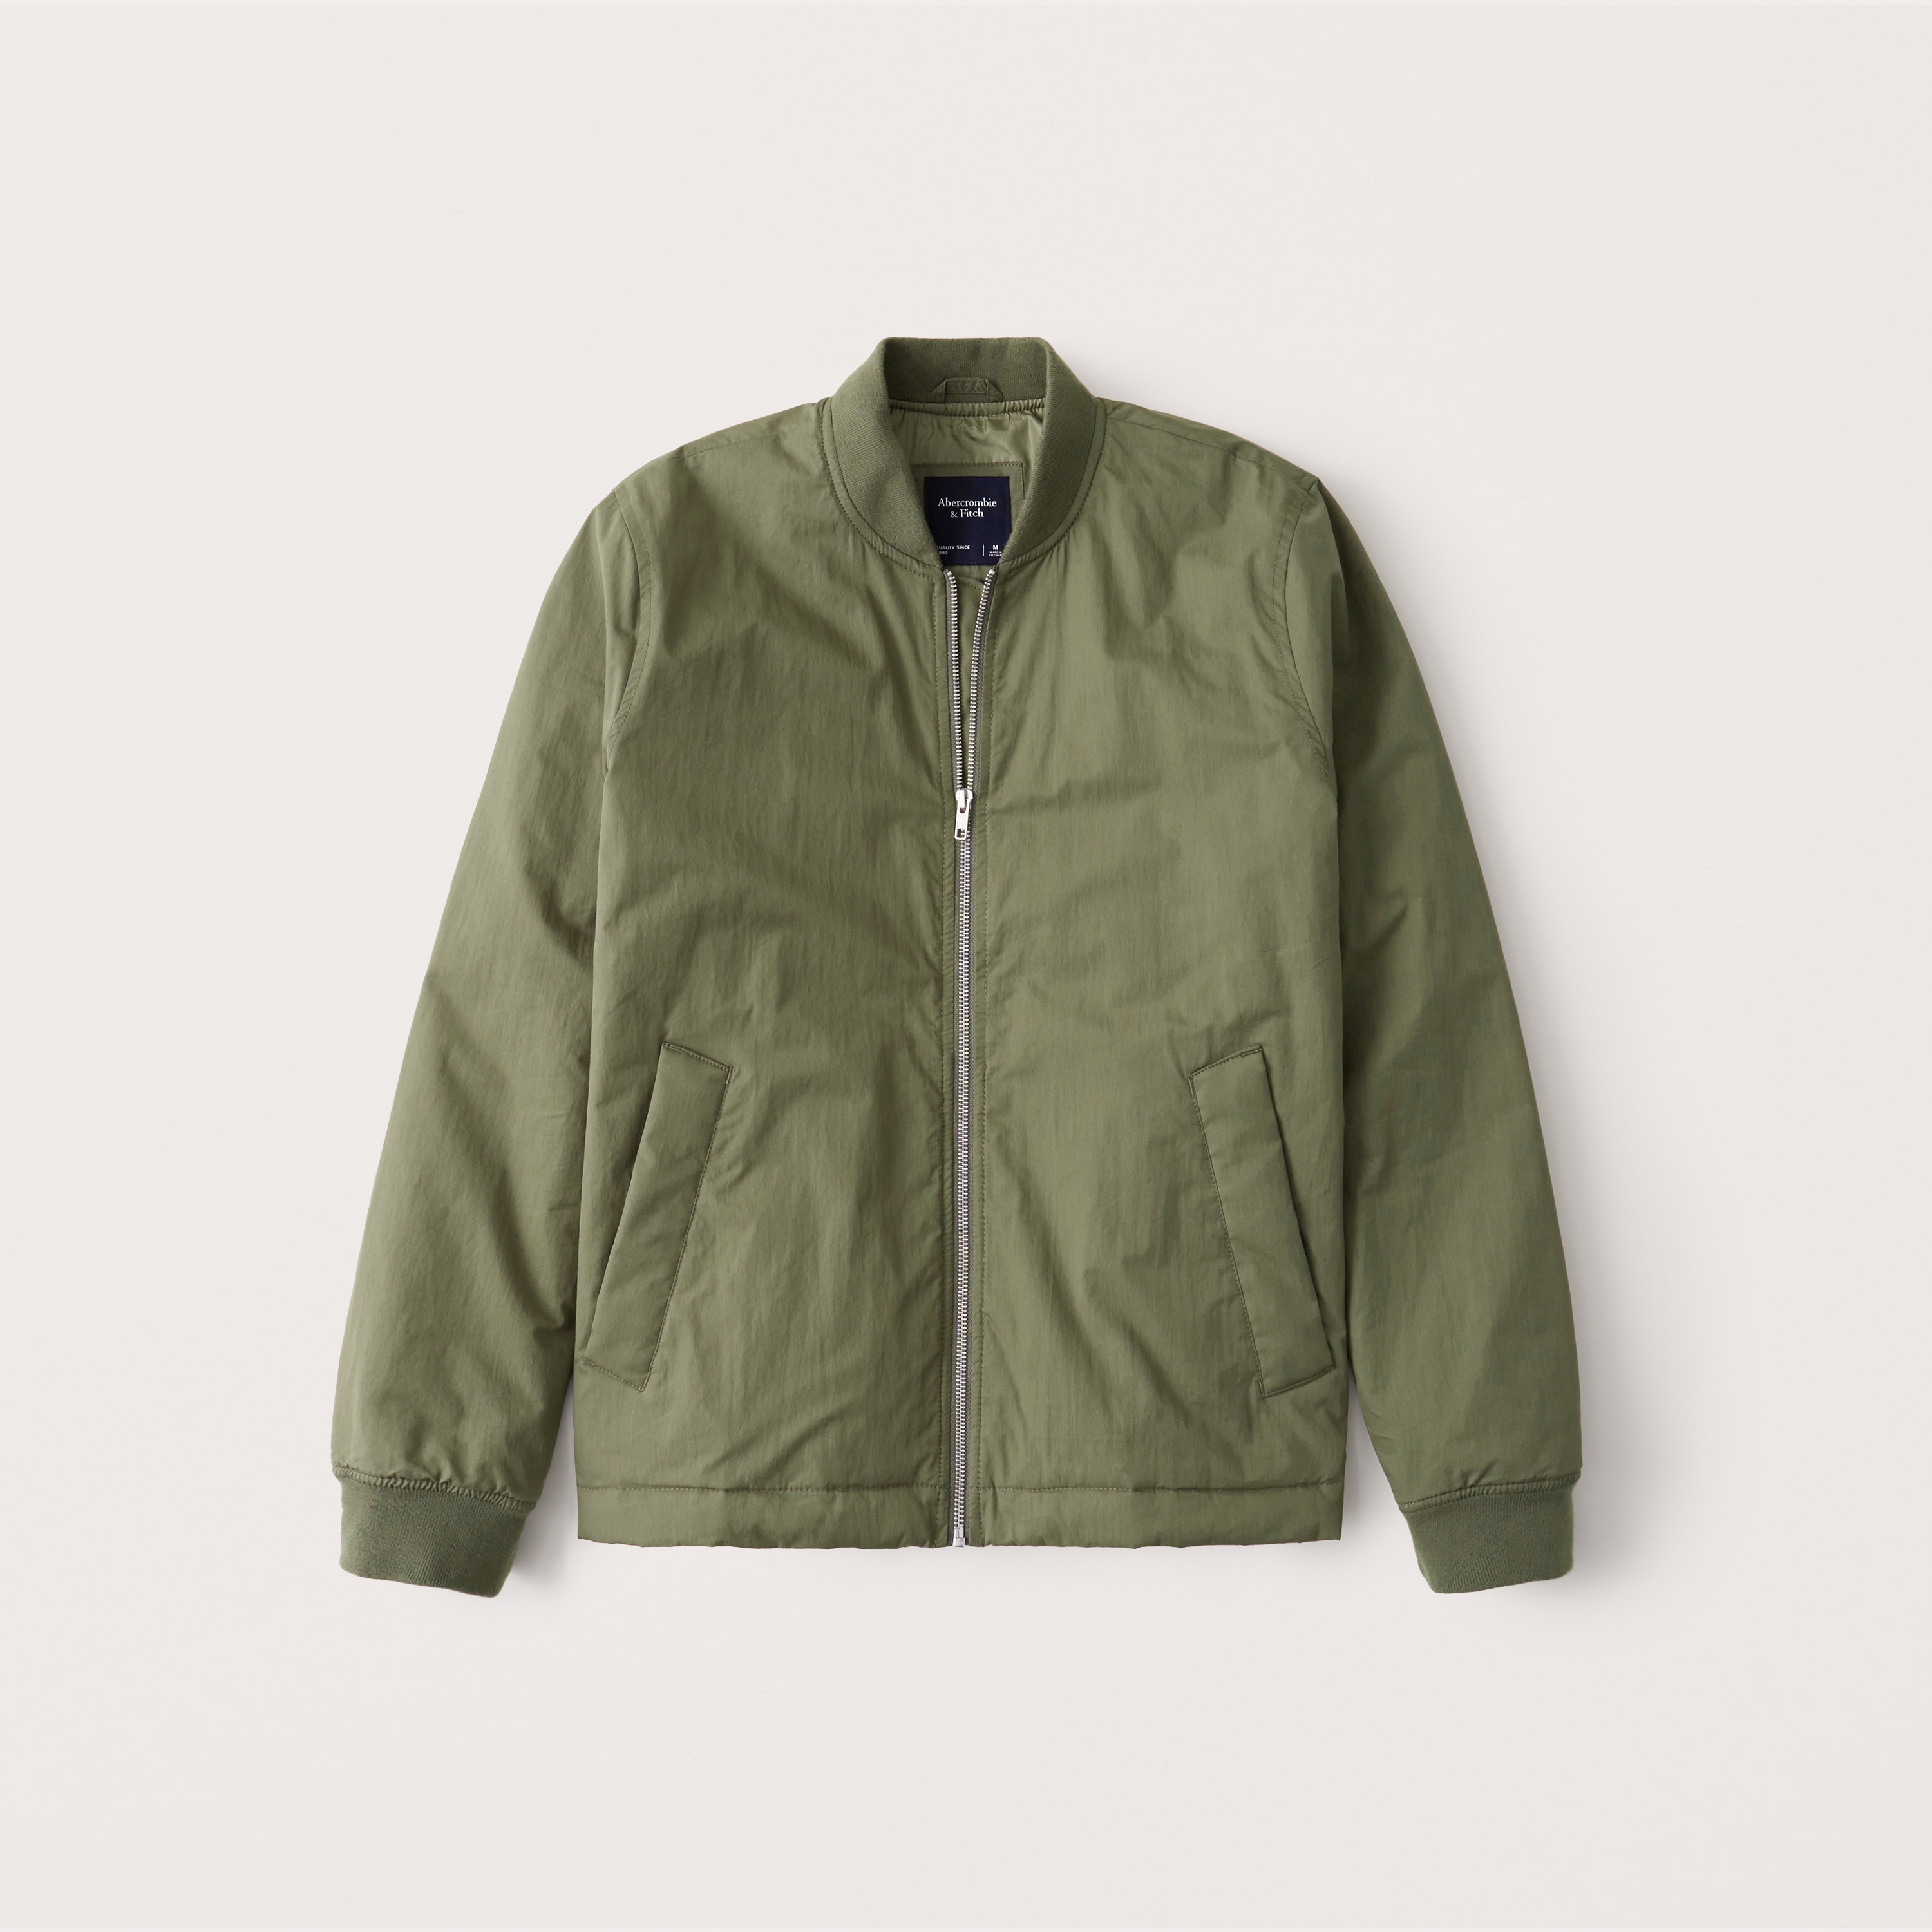 bomber jacket abercrombie and fitch